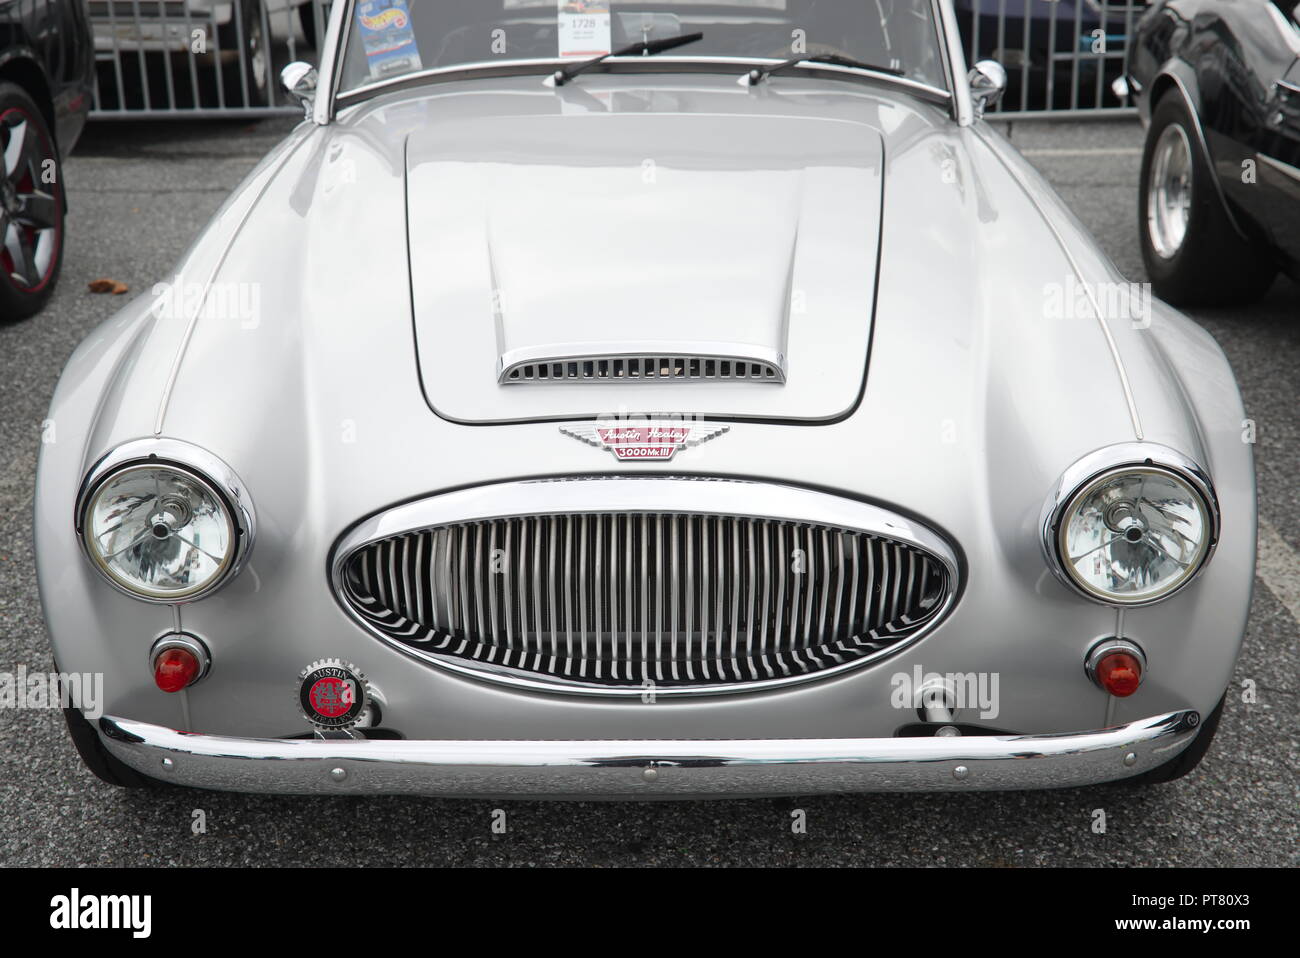 Silver Austin Healey 3000 Mk3 on display at the Ocean City Convention Center, Ocean City, Maryland, USA. Stock Photo